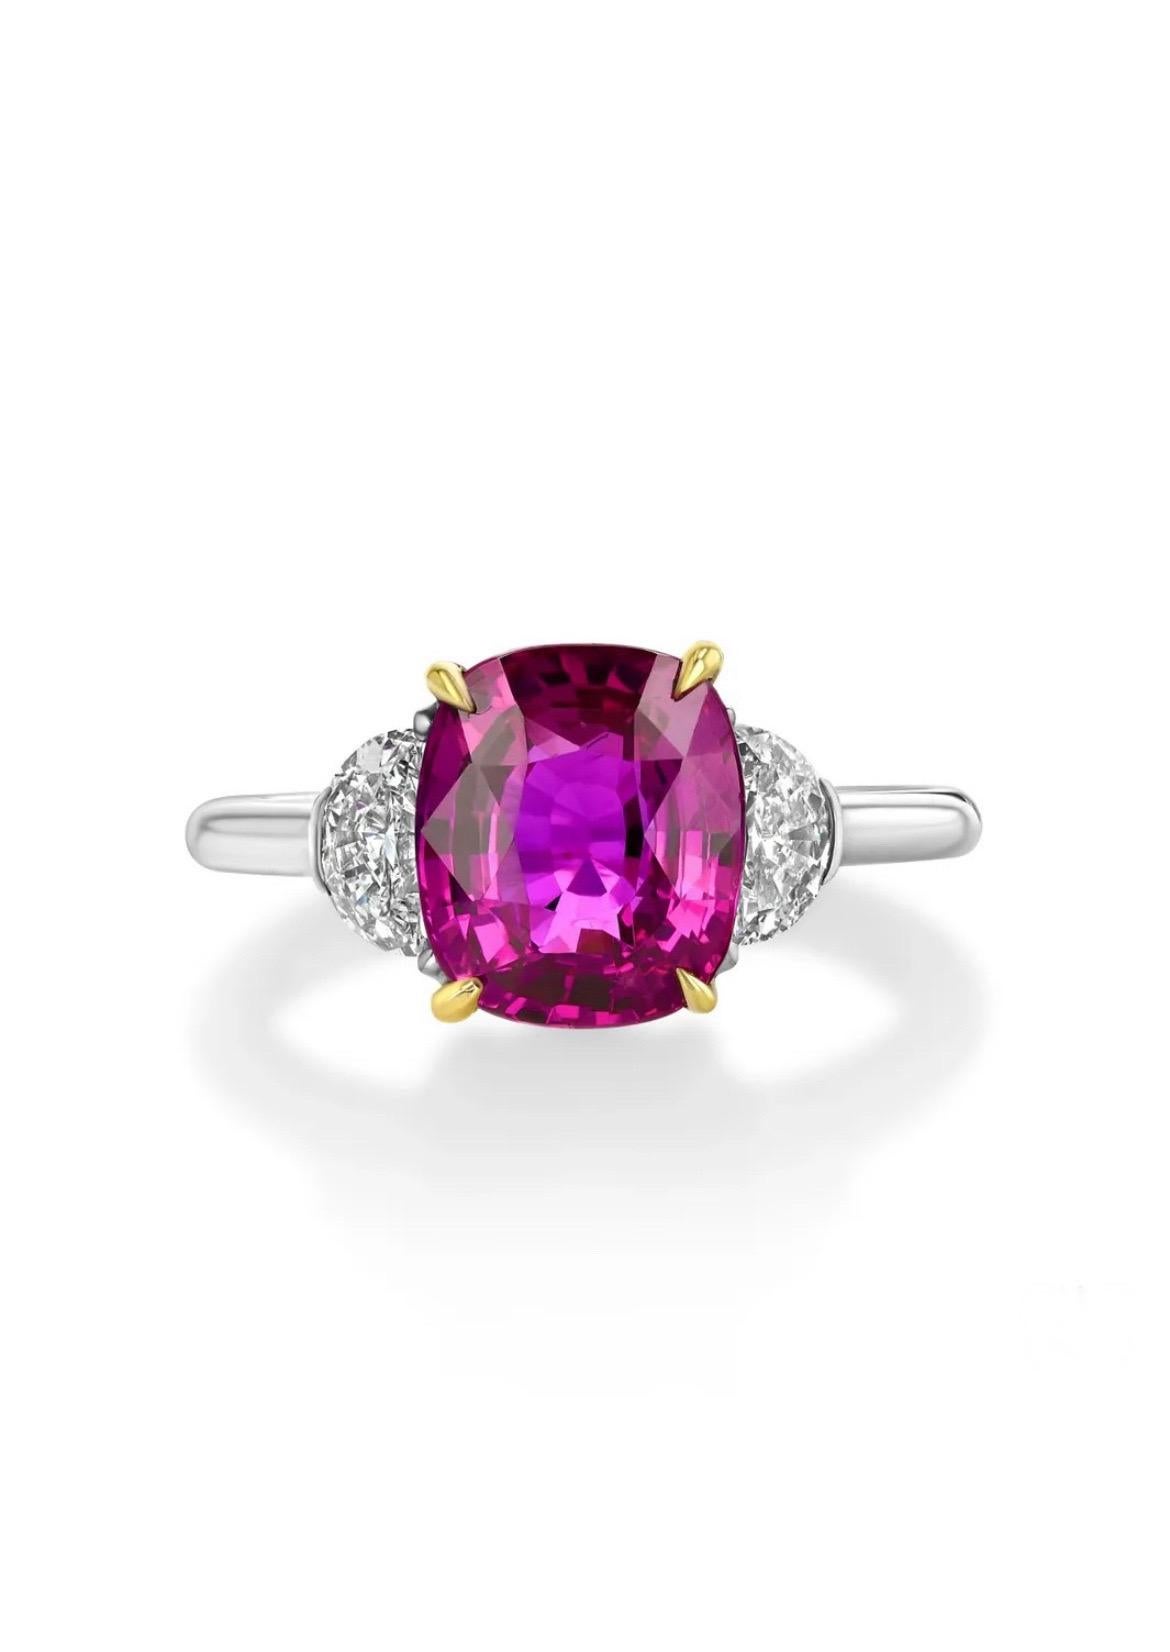 Modern 4.11 carat cushion-cut, untreated Mozambique Ruby ring. AGL certified.  For Sale